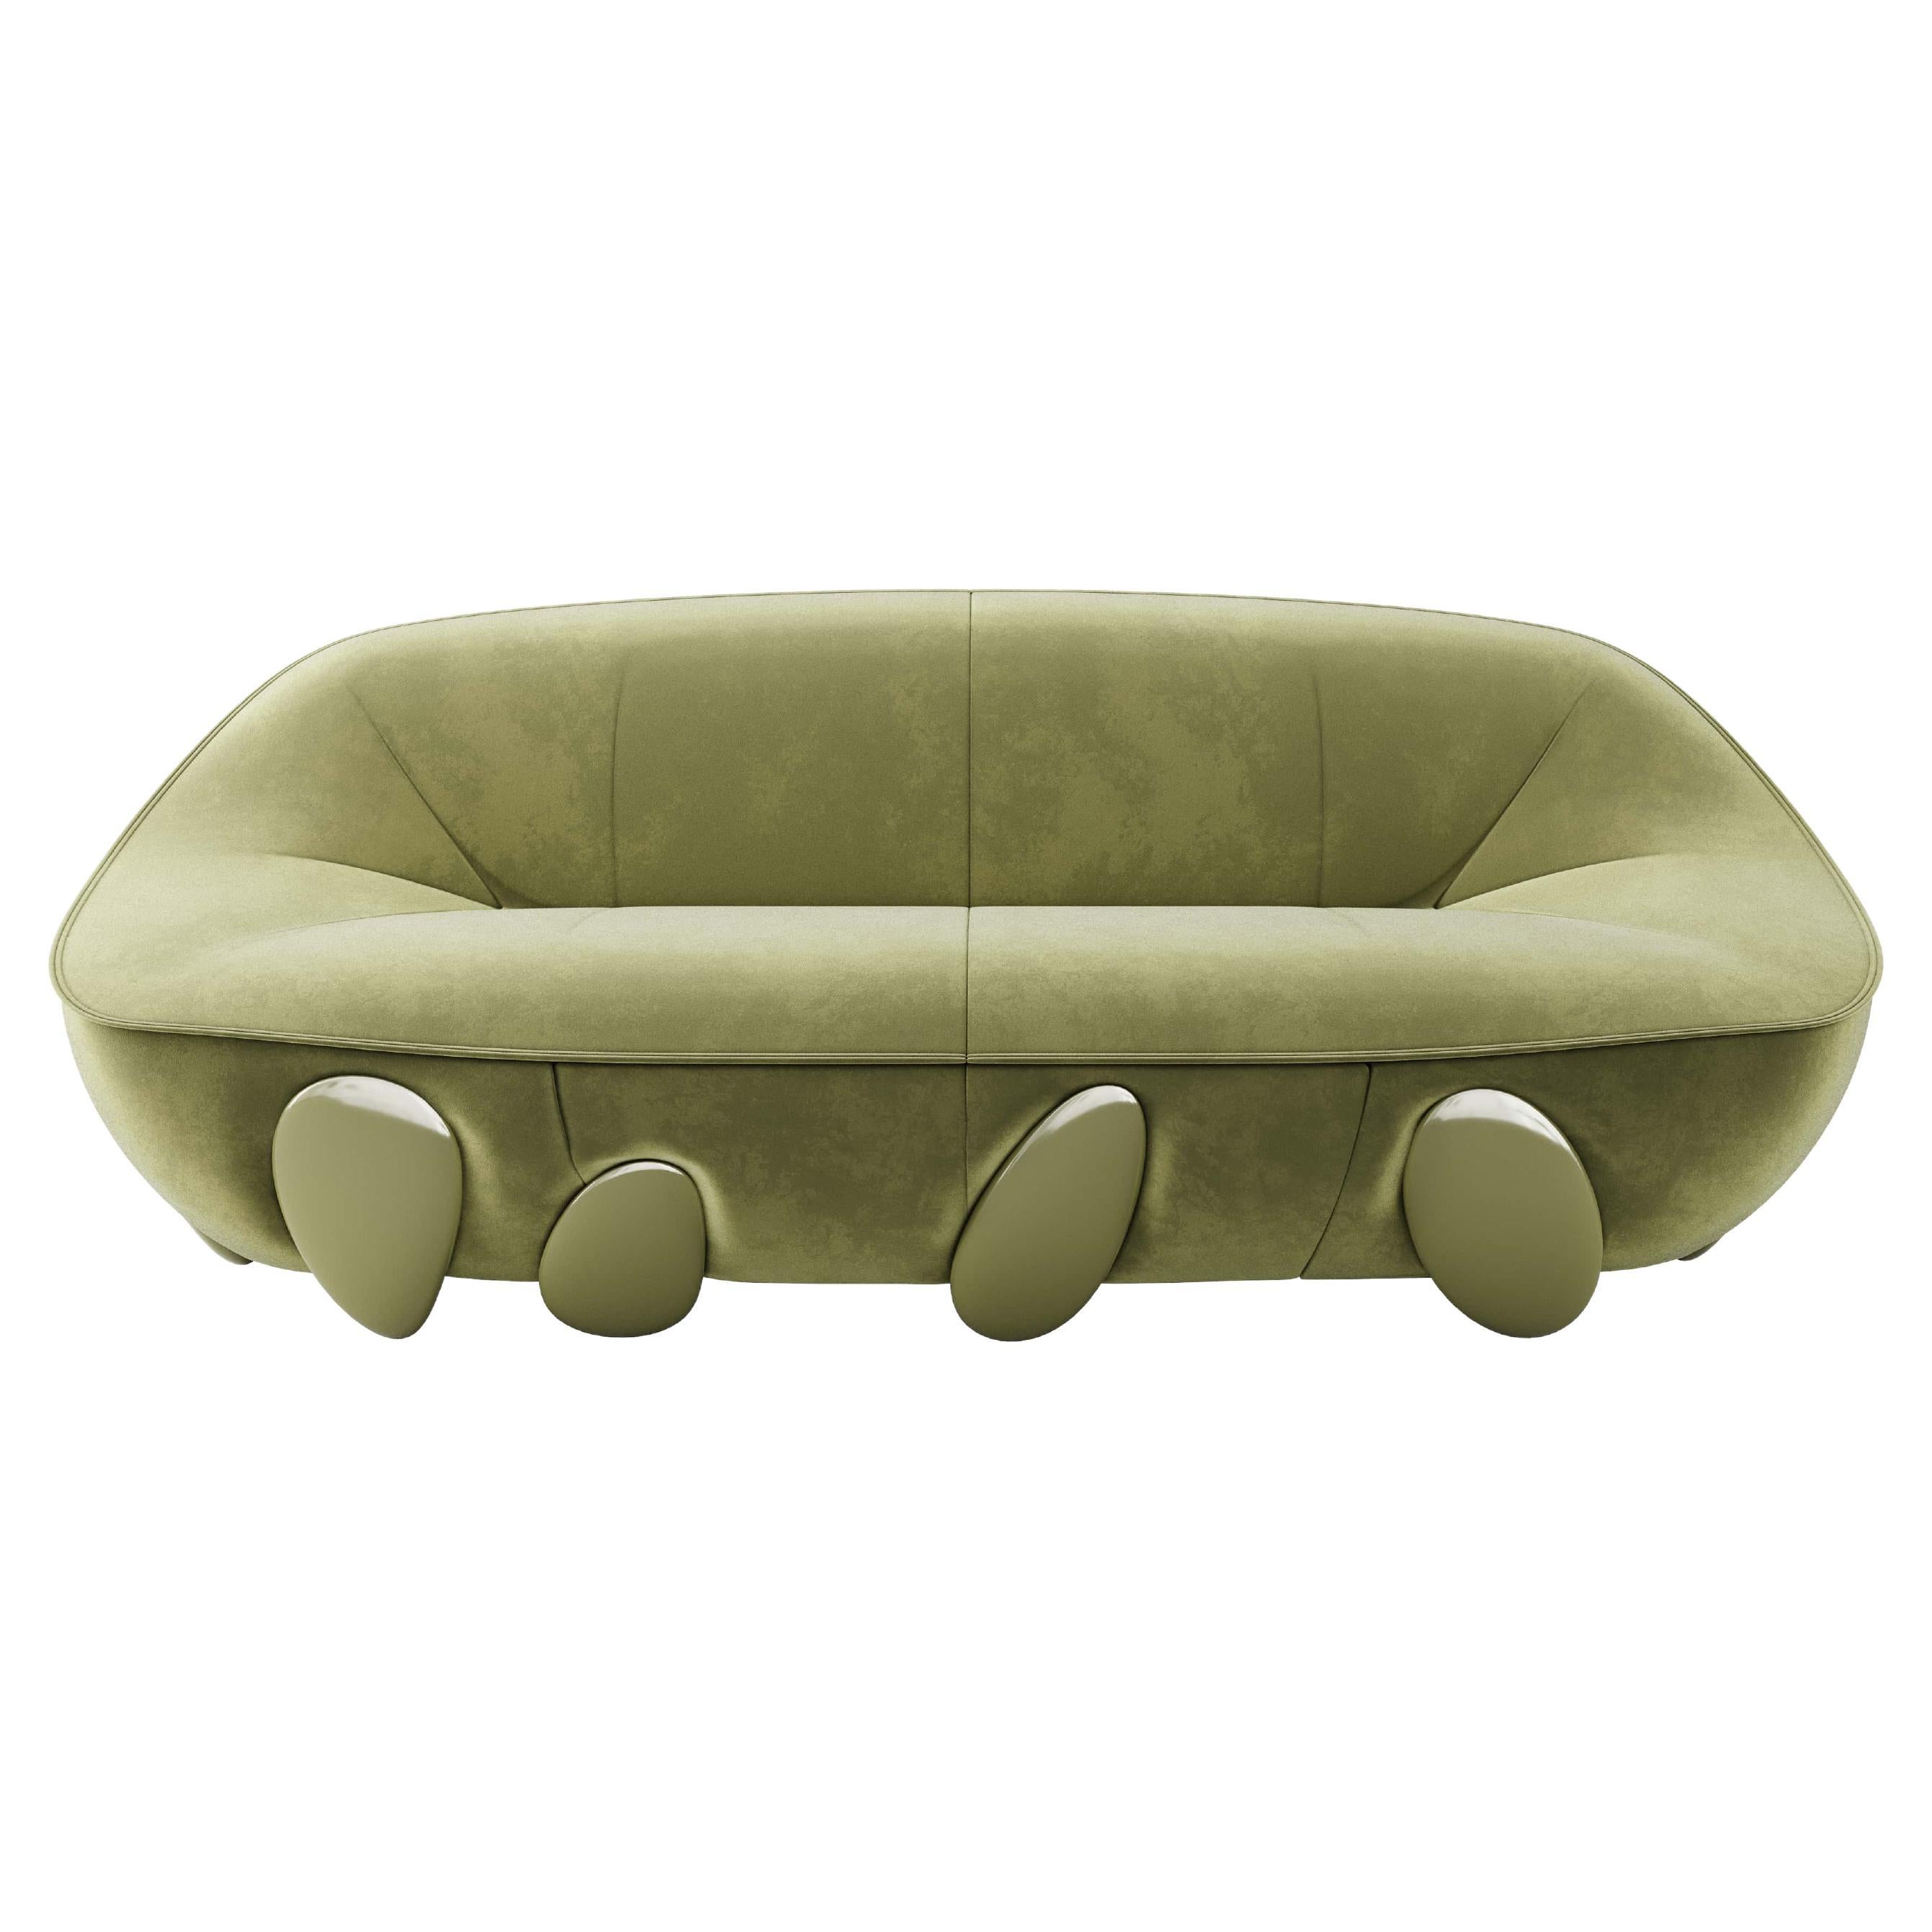 Contemporary Round Sage Green Velvet Sofa with Handpainted Legs For Sale